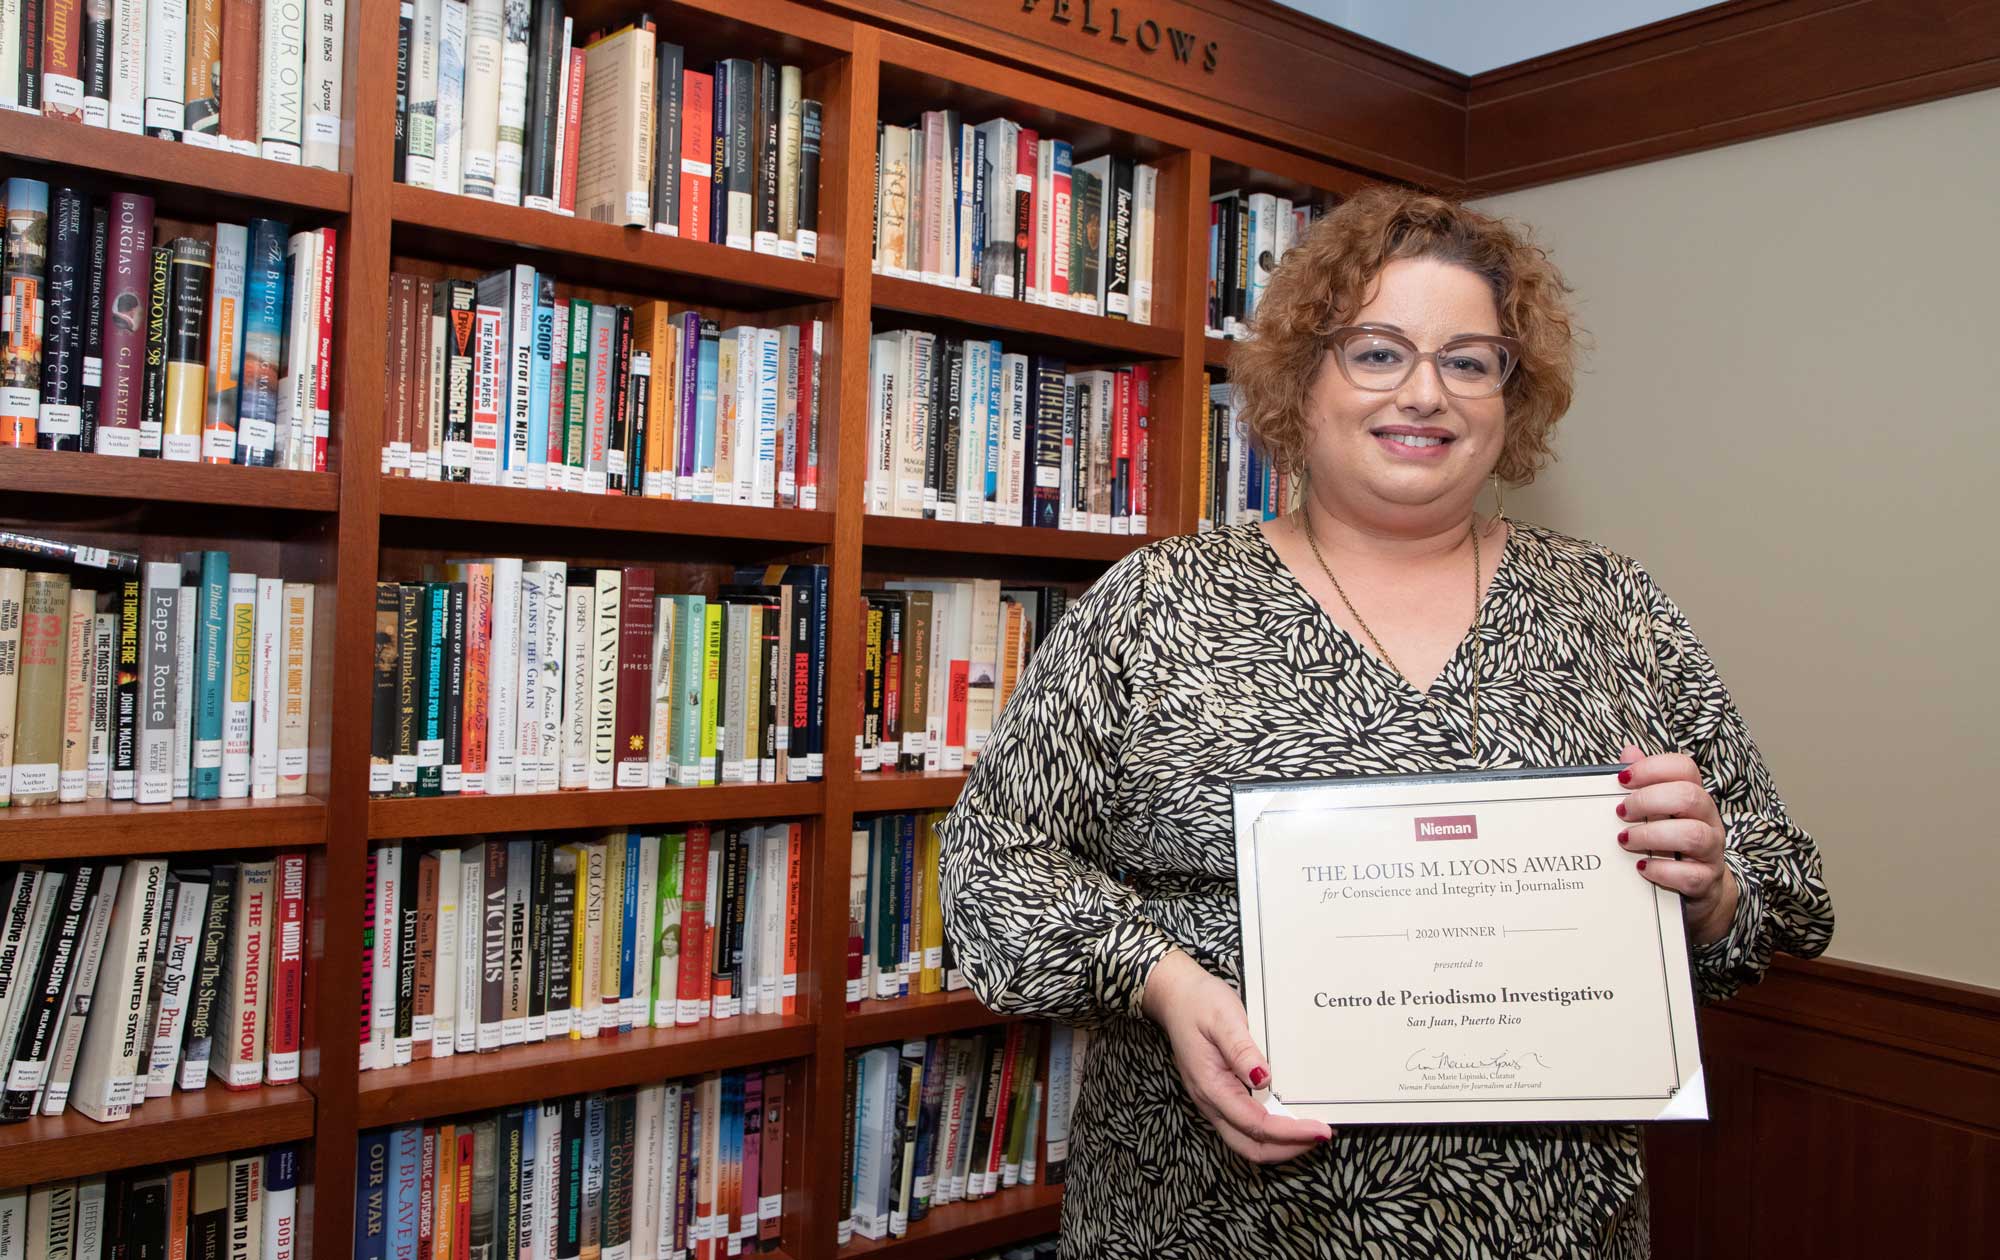 Centro de Periodismo Investigativo’s executive director Carla Minet holds the 2020 Louis M. Lyons Award for Conscience and Integrity in Journalism.